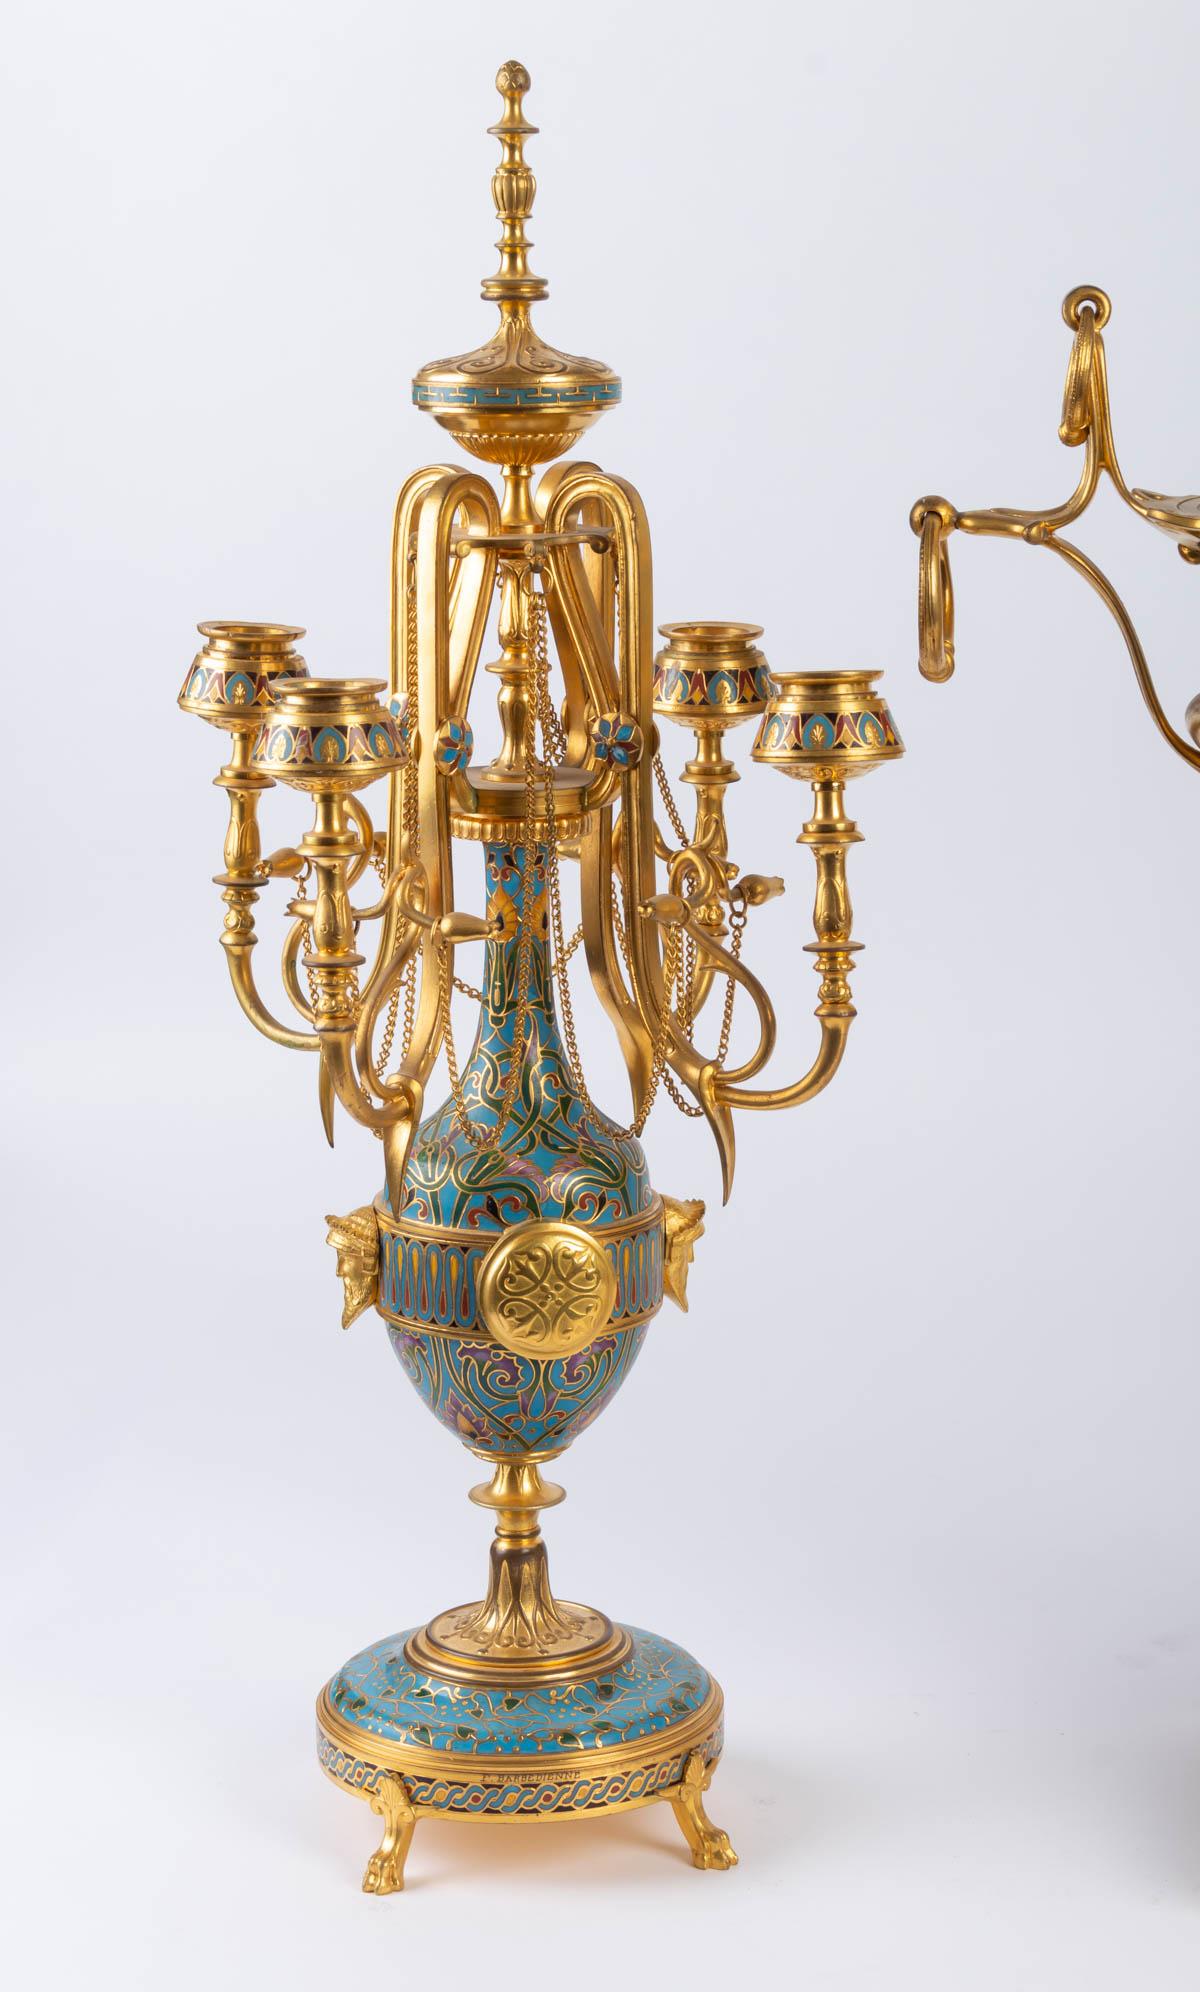 Cloisonné and enamelled bronze set, signed F. Barbedienne, 19th century, Napoleone III period.

The clock surmounted by a gilded bronze bowl and an onyx body.

Measures: Clock H 45 cm, W 39 cm, D 23 cm;

Candelabra H 50 cm, W 25 cm, D 25 cm.